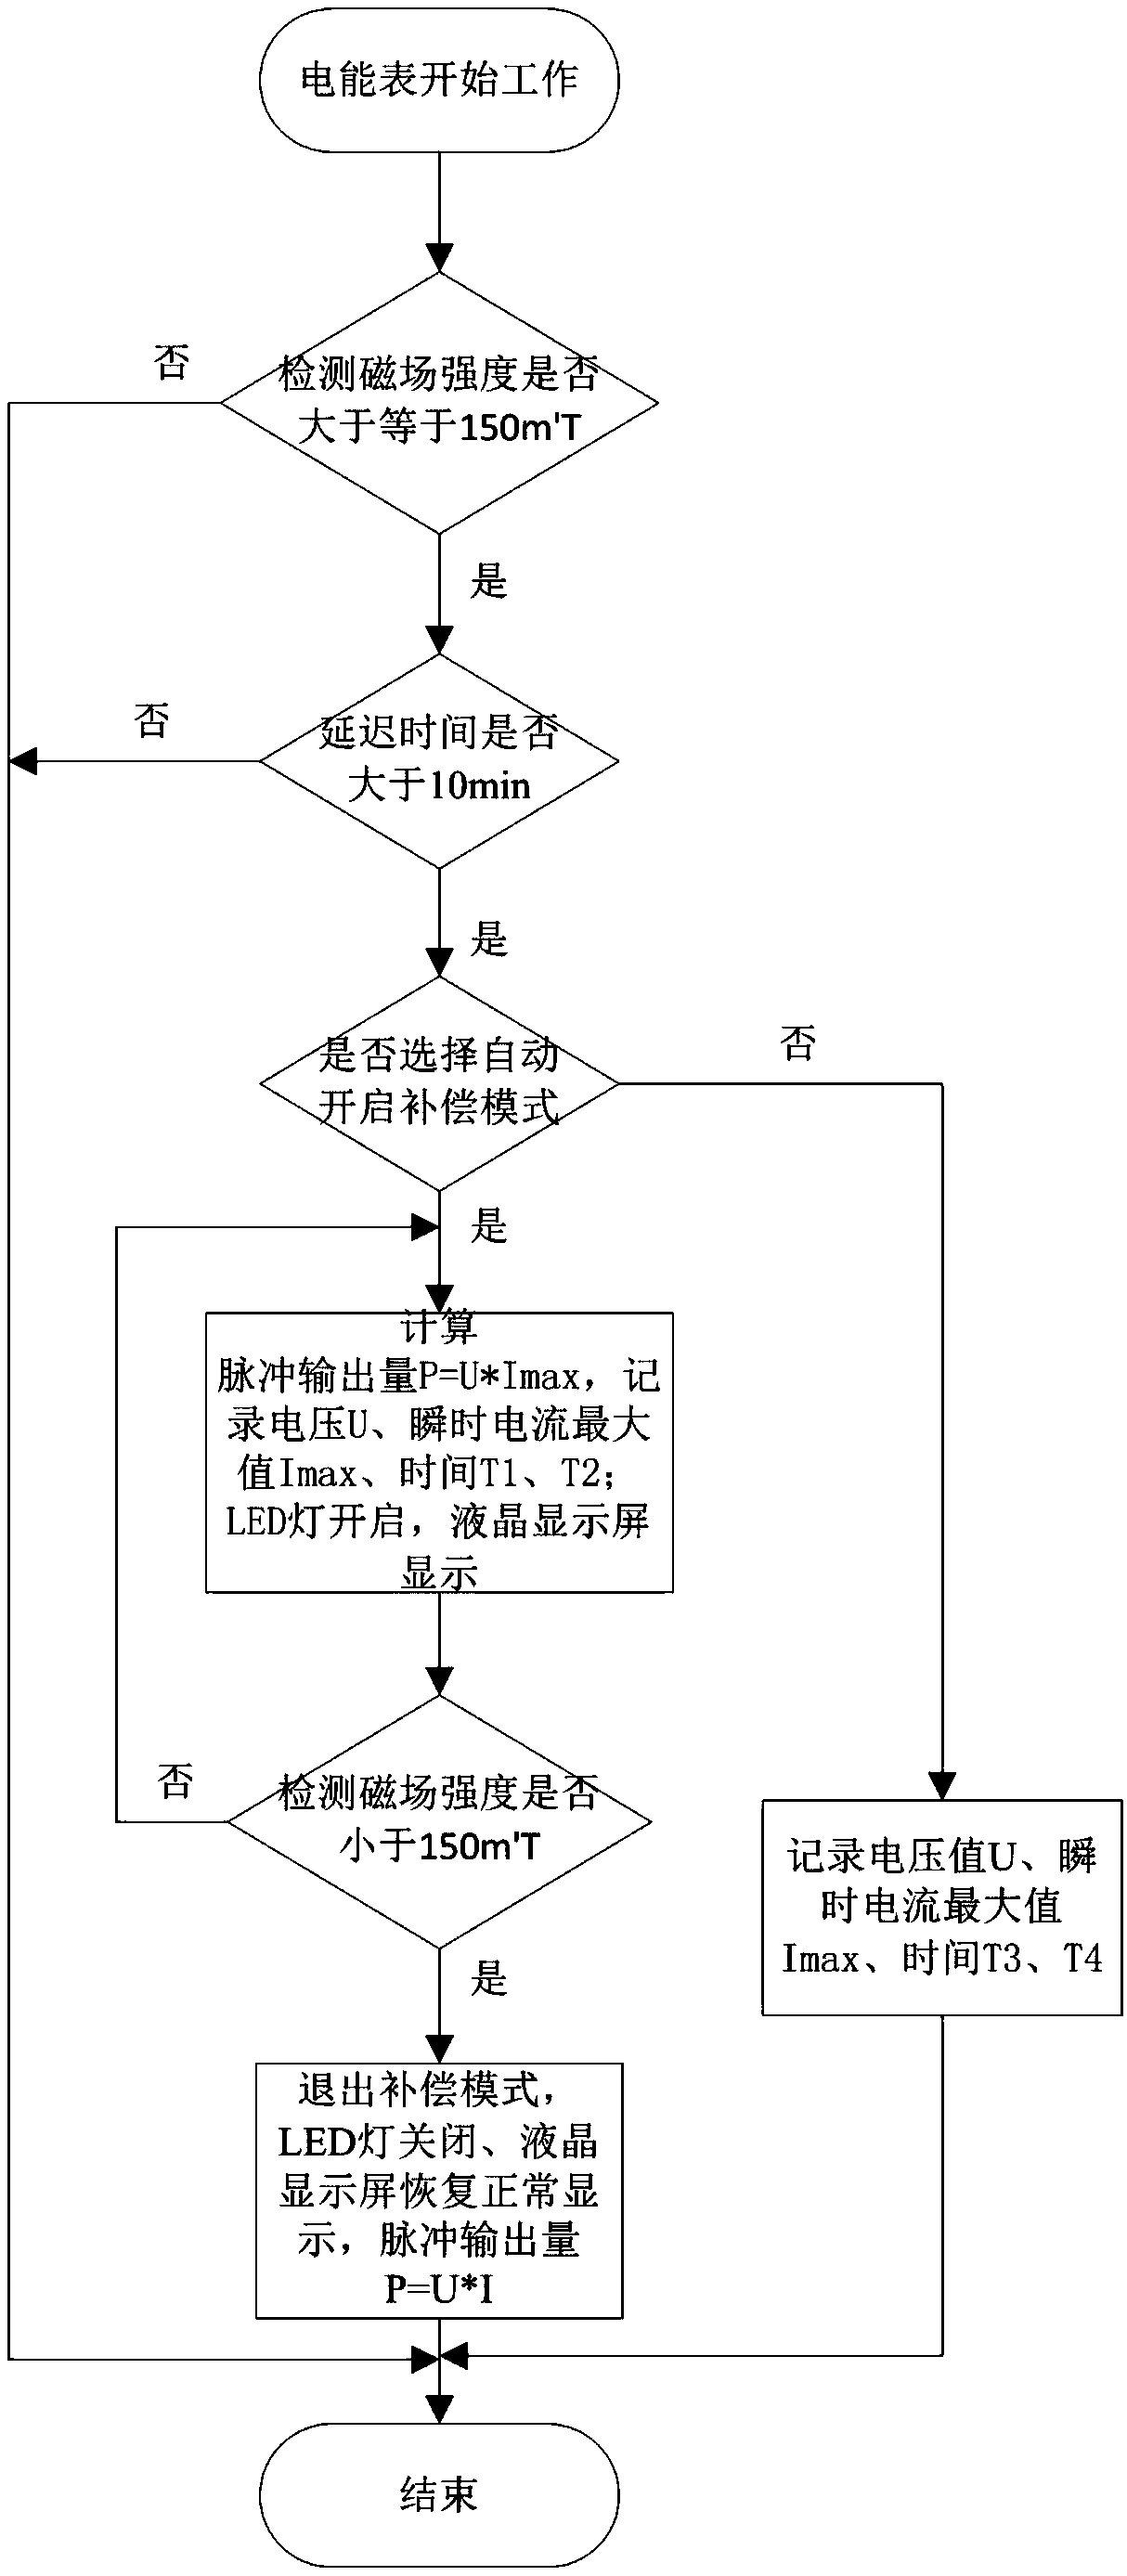 Anti-electric stealing measuring method for electric energy meter